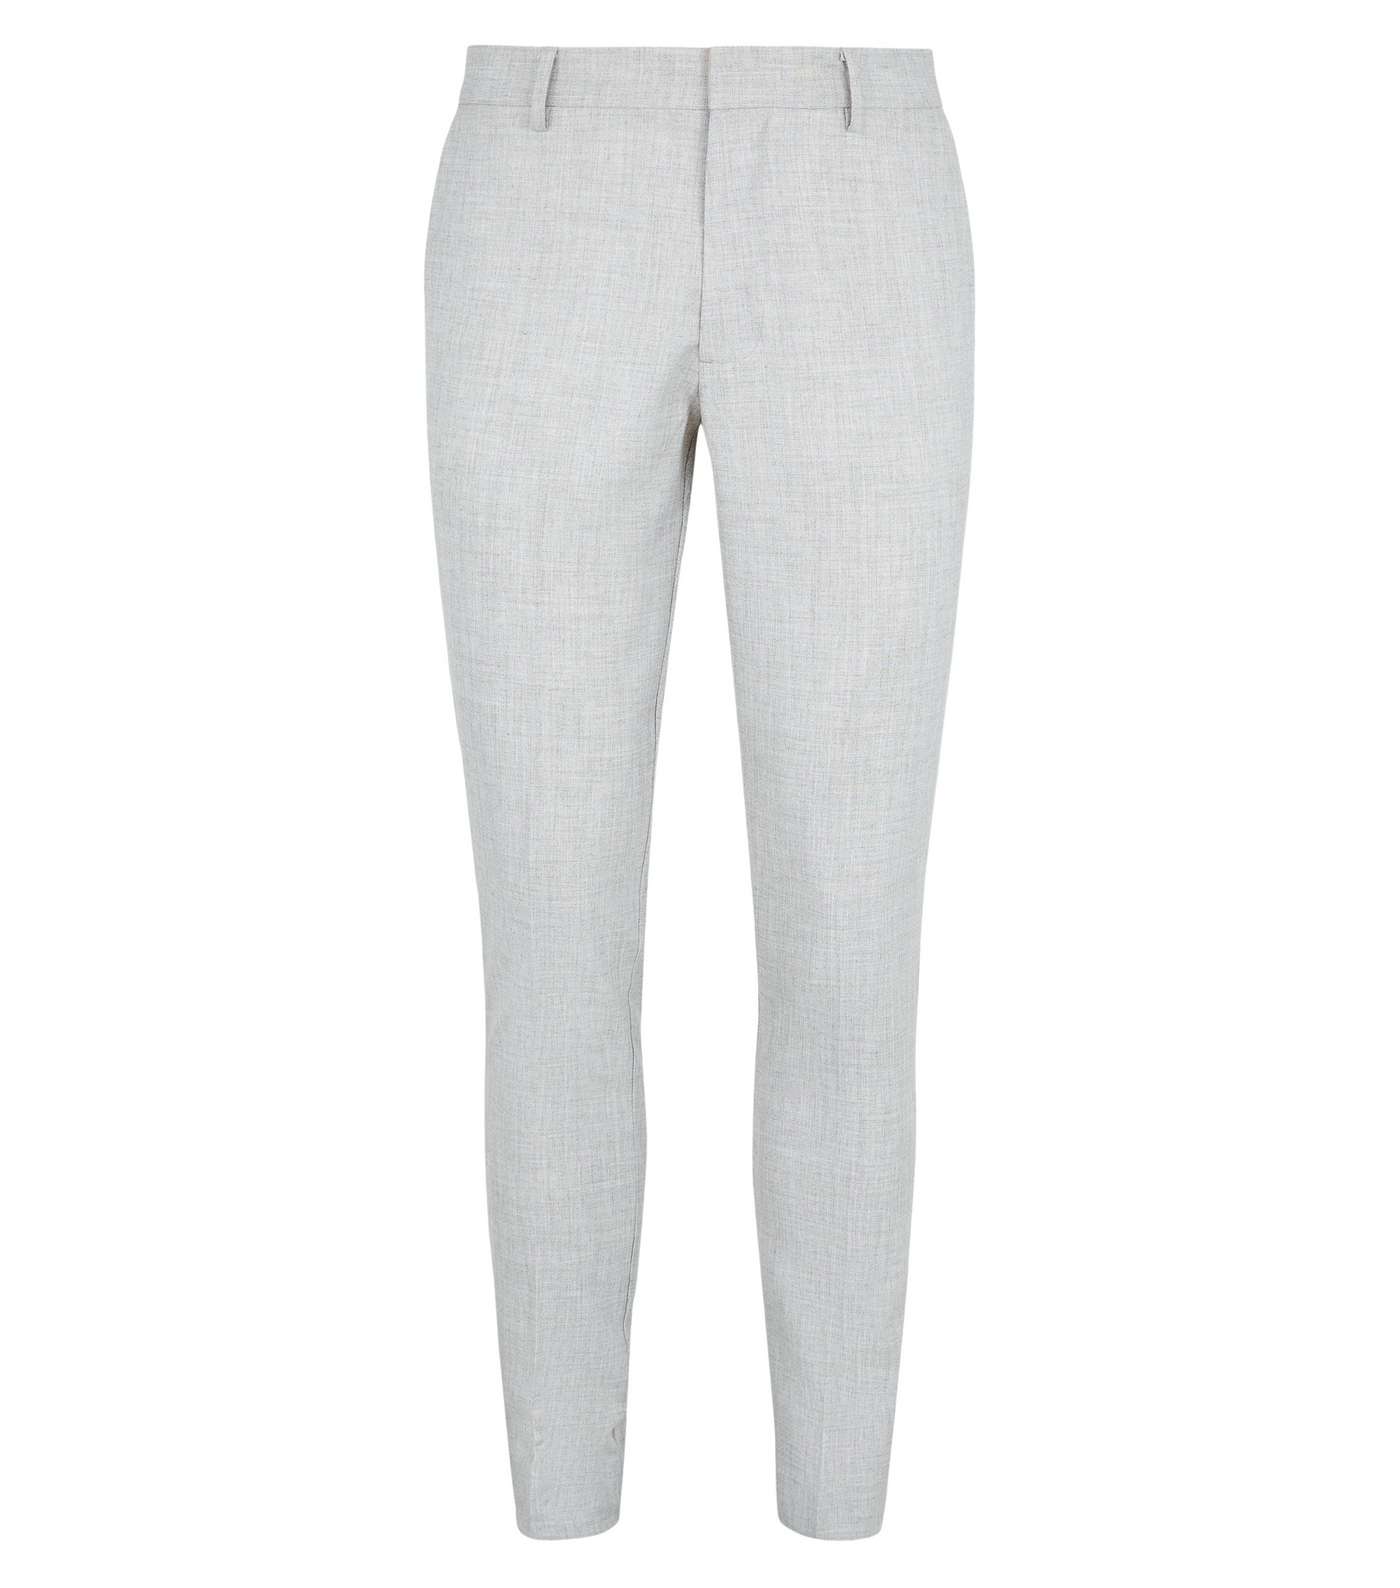 Pale Grey Skinny Suit Trousers Image 4